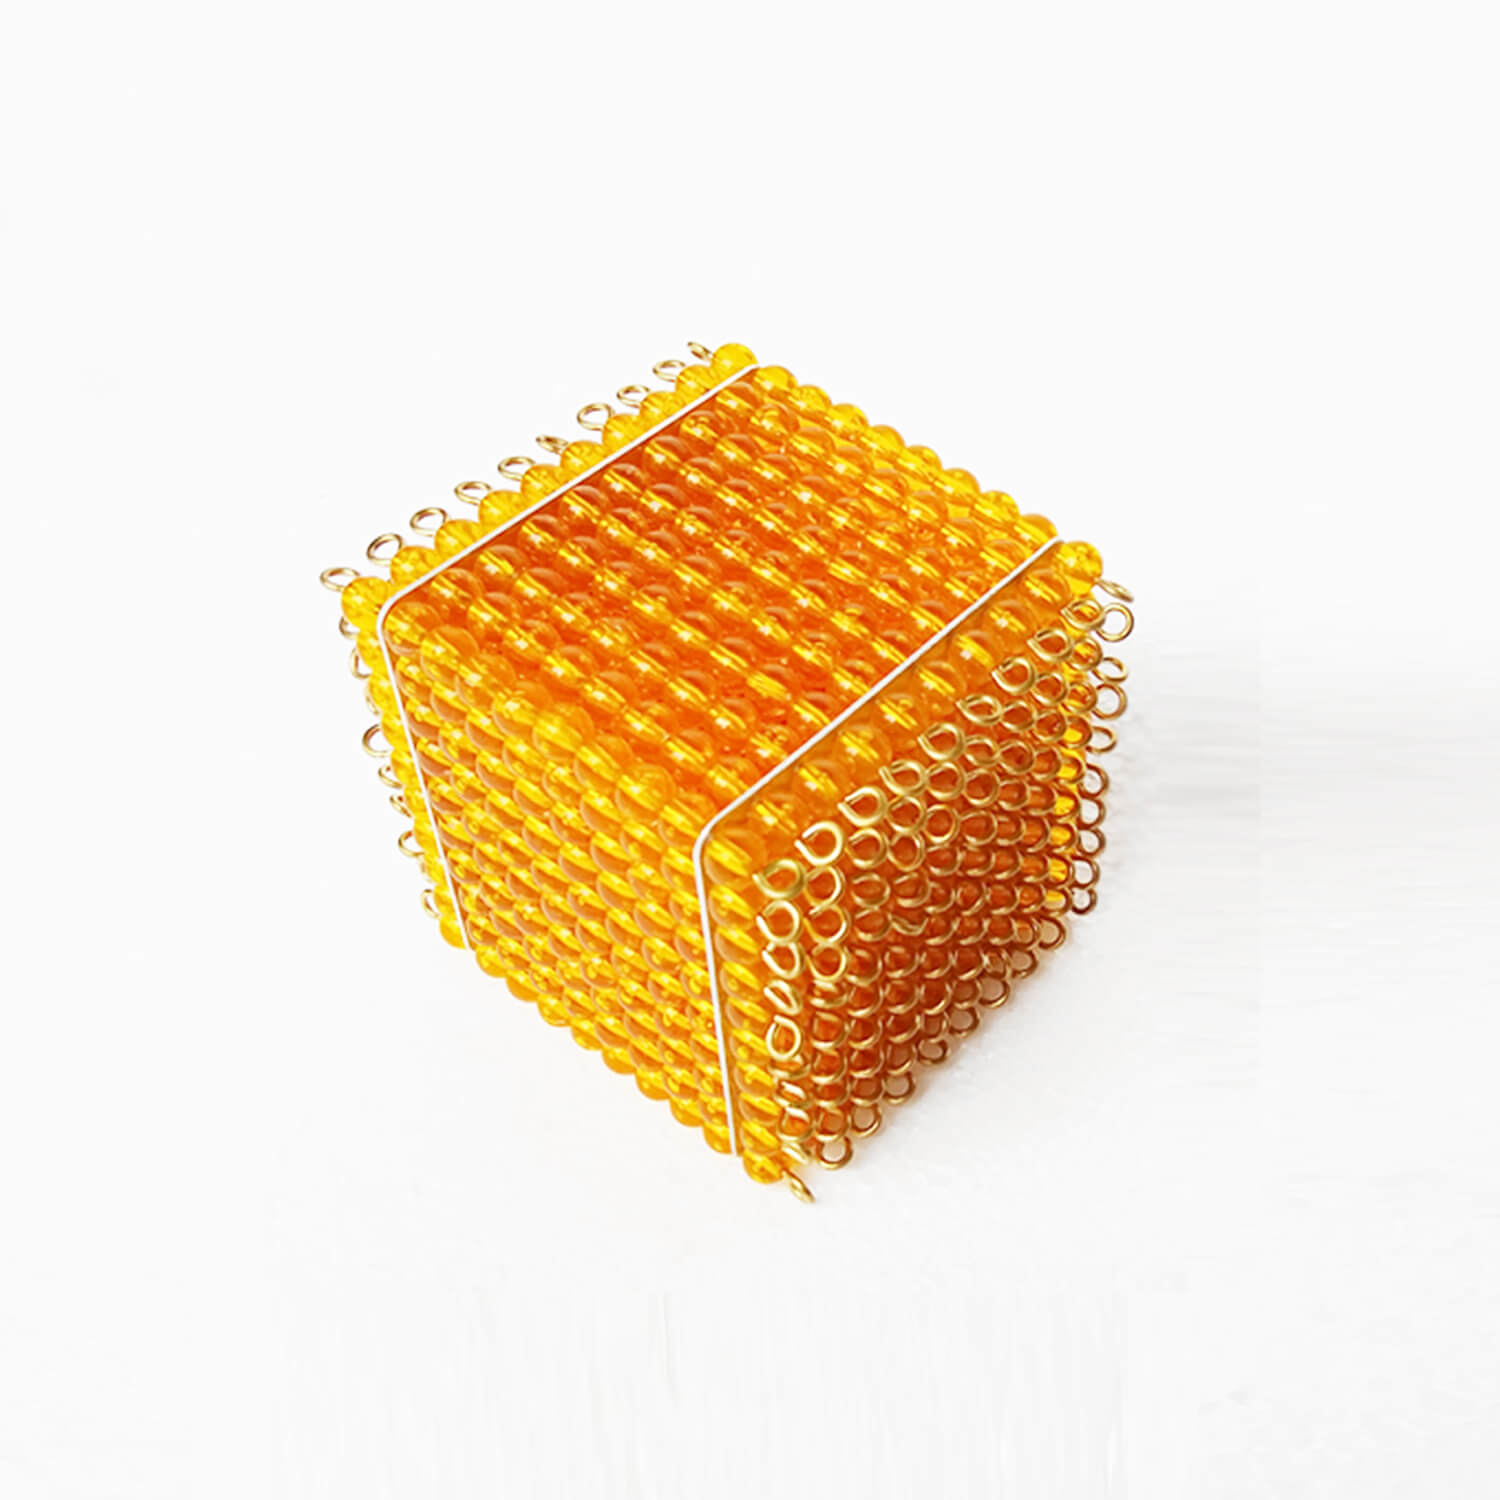 One Golden Bead Cube Of 1000